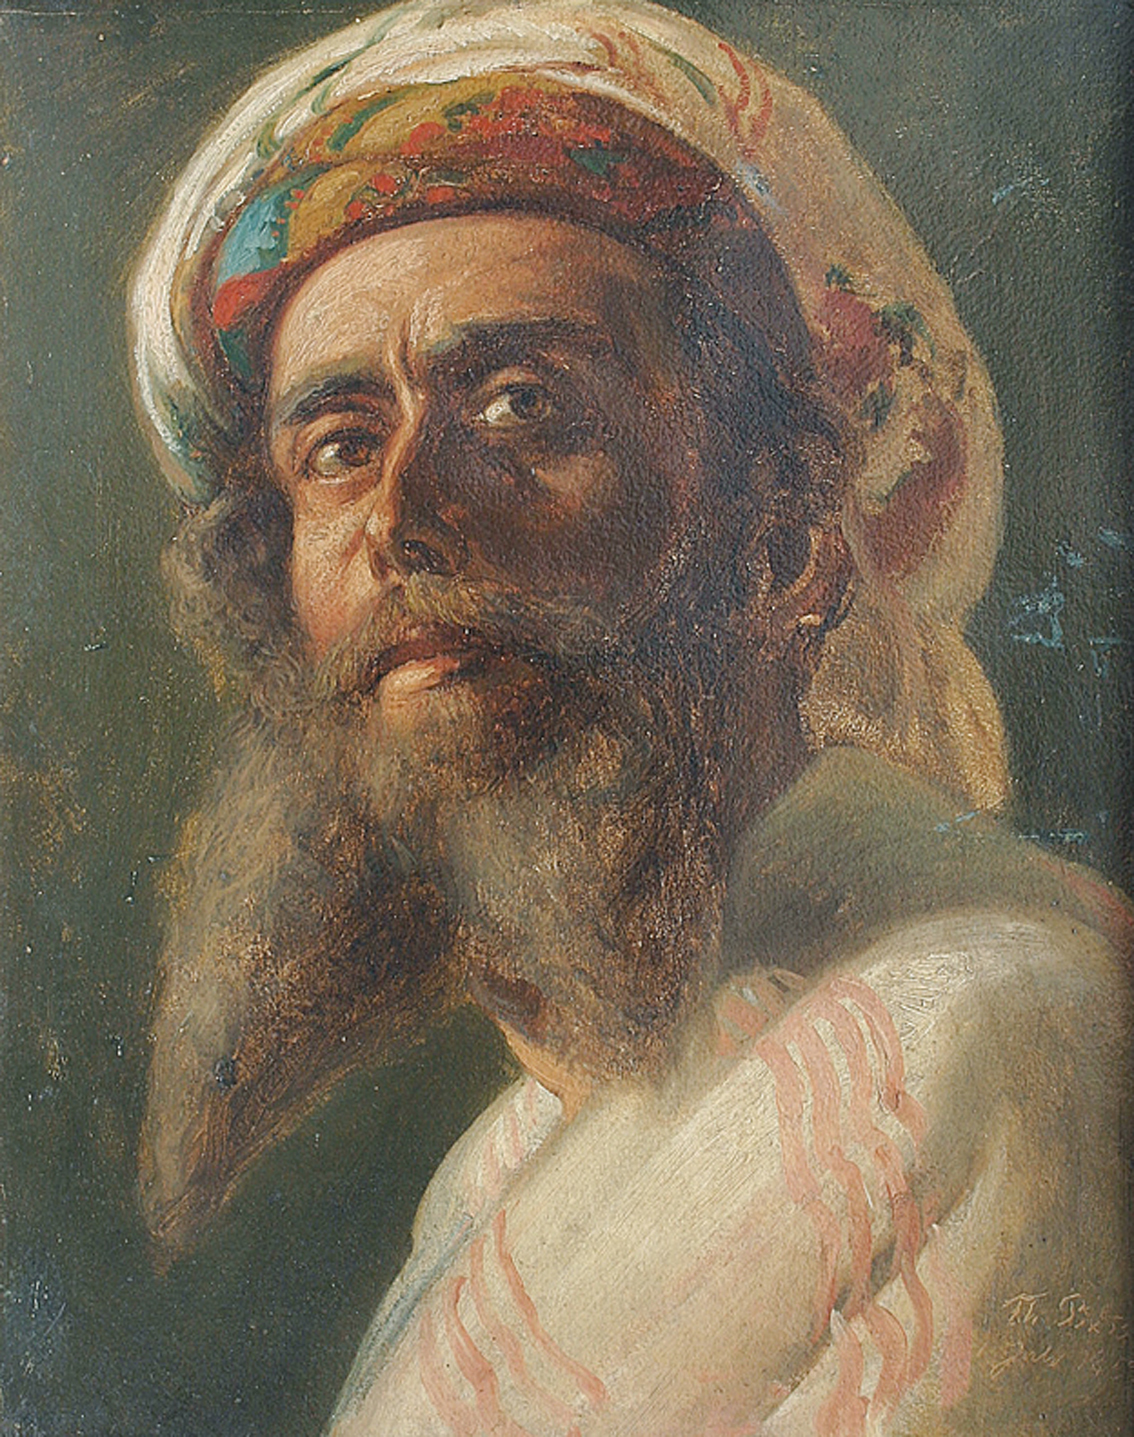 "Portrait of a man from the Middle East"